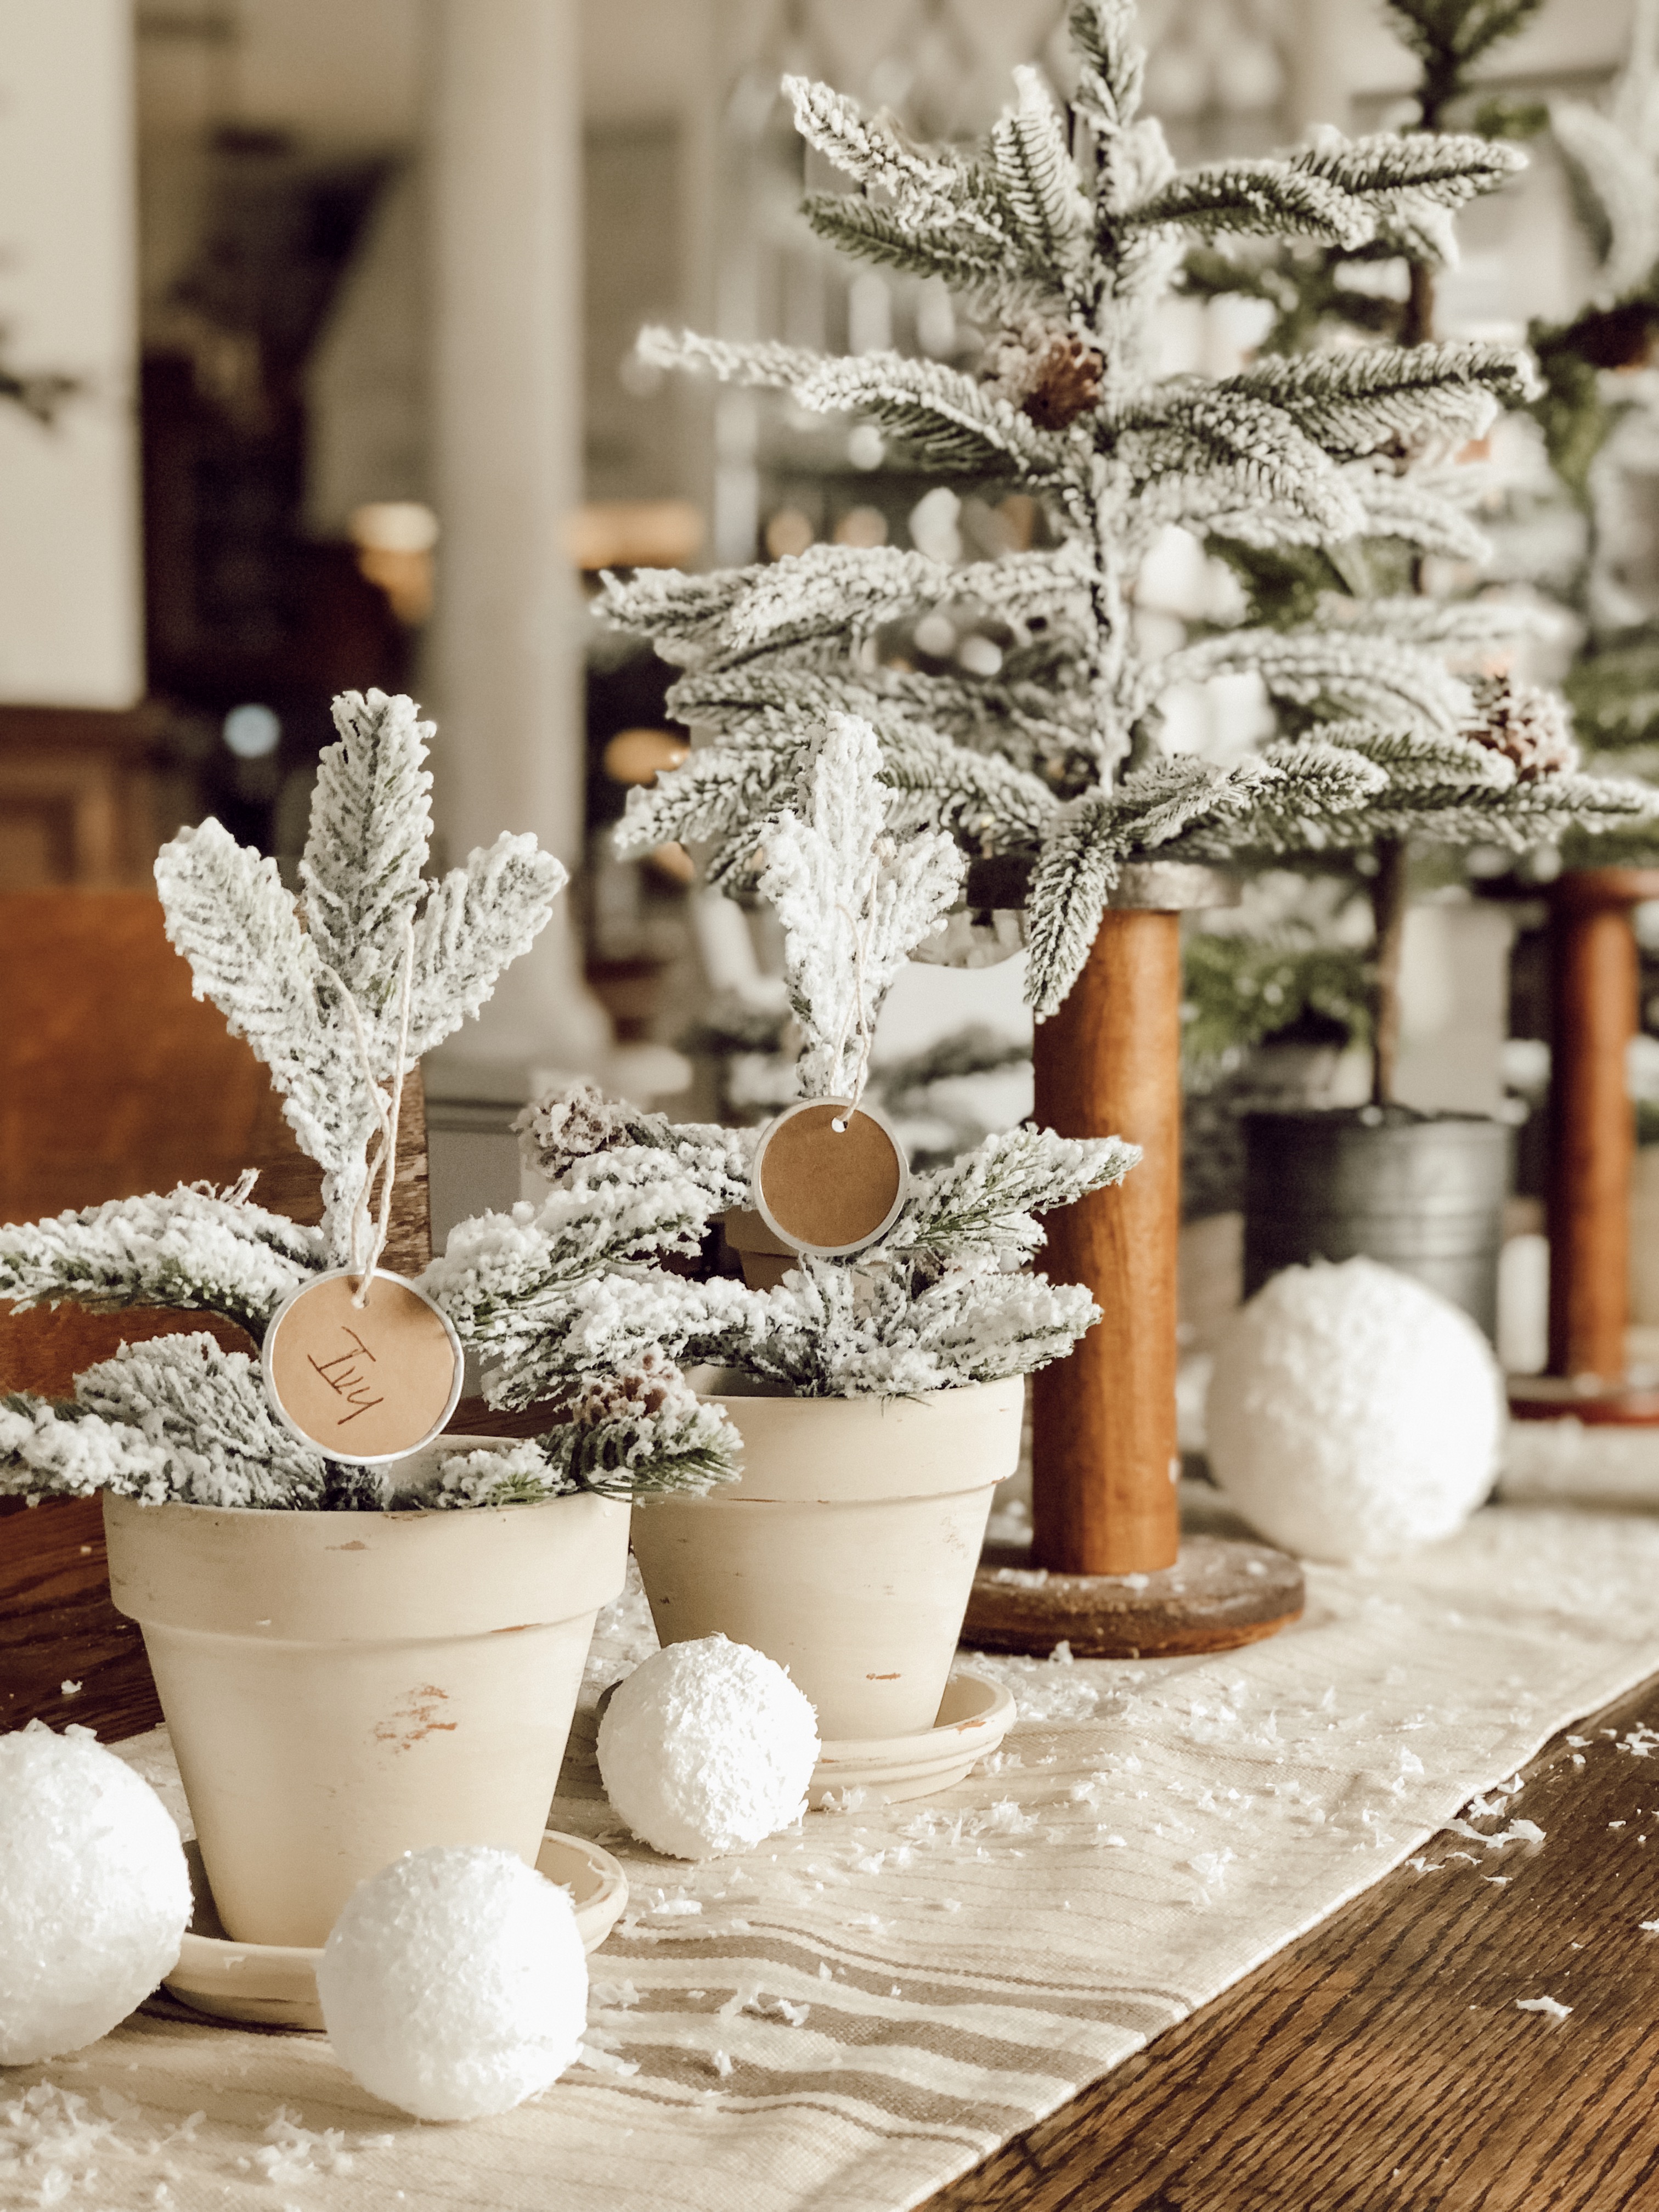 How to incorporate vintage decor into holiday decor - House on Winchester